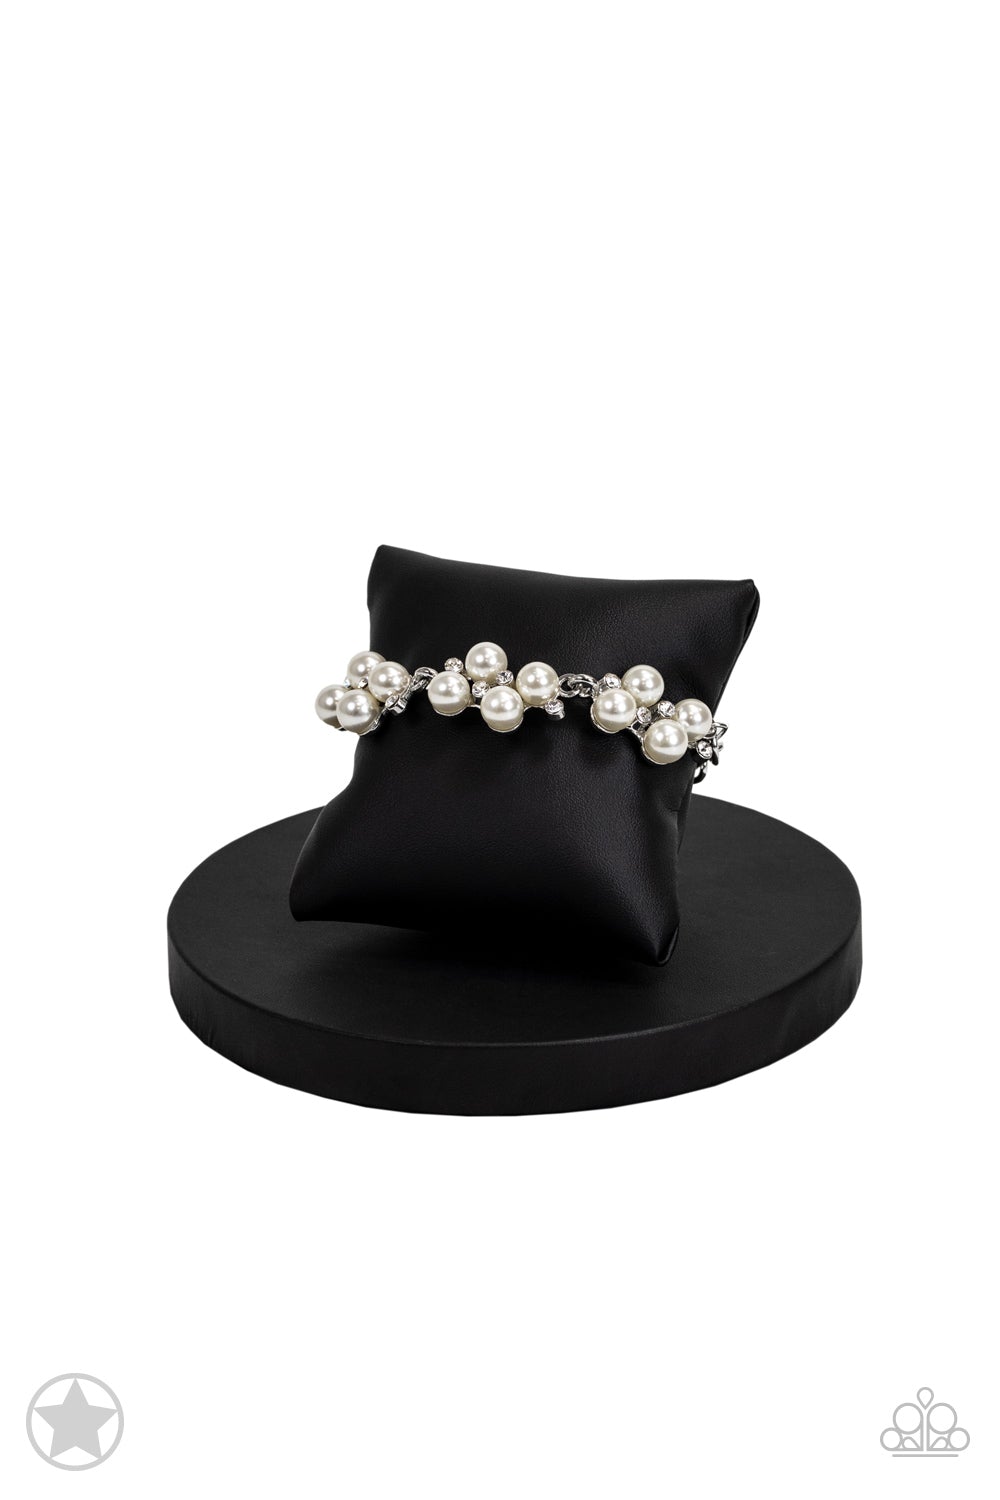 I Do - White Pearl Bracelet - Paparazzi Accessories - Blockbuster - on bust - CarasShop.com - $5 Jewelry by Cara Jewels